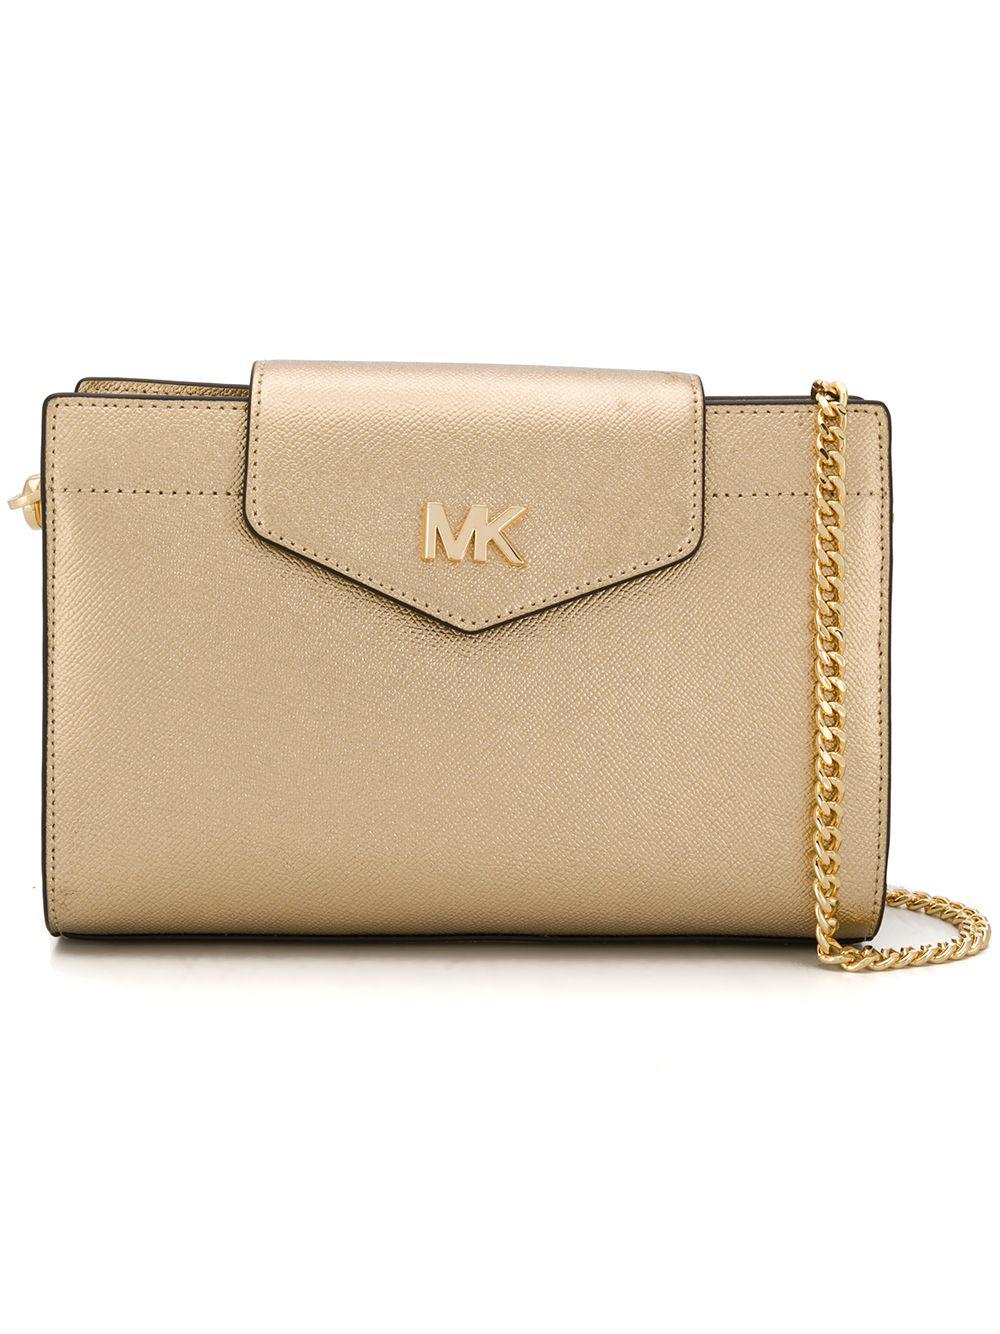 Michael Kors ALL GOLD EVERYTHING Large crossbody clutch, Prism